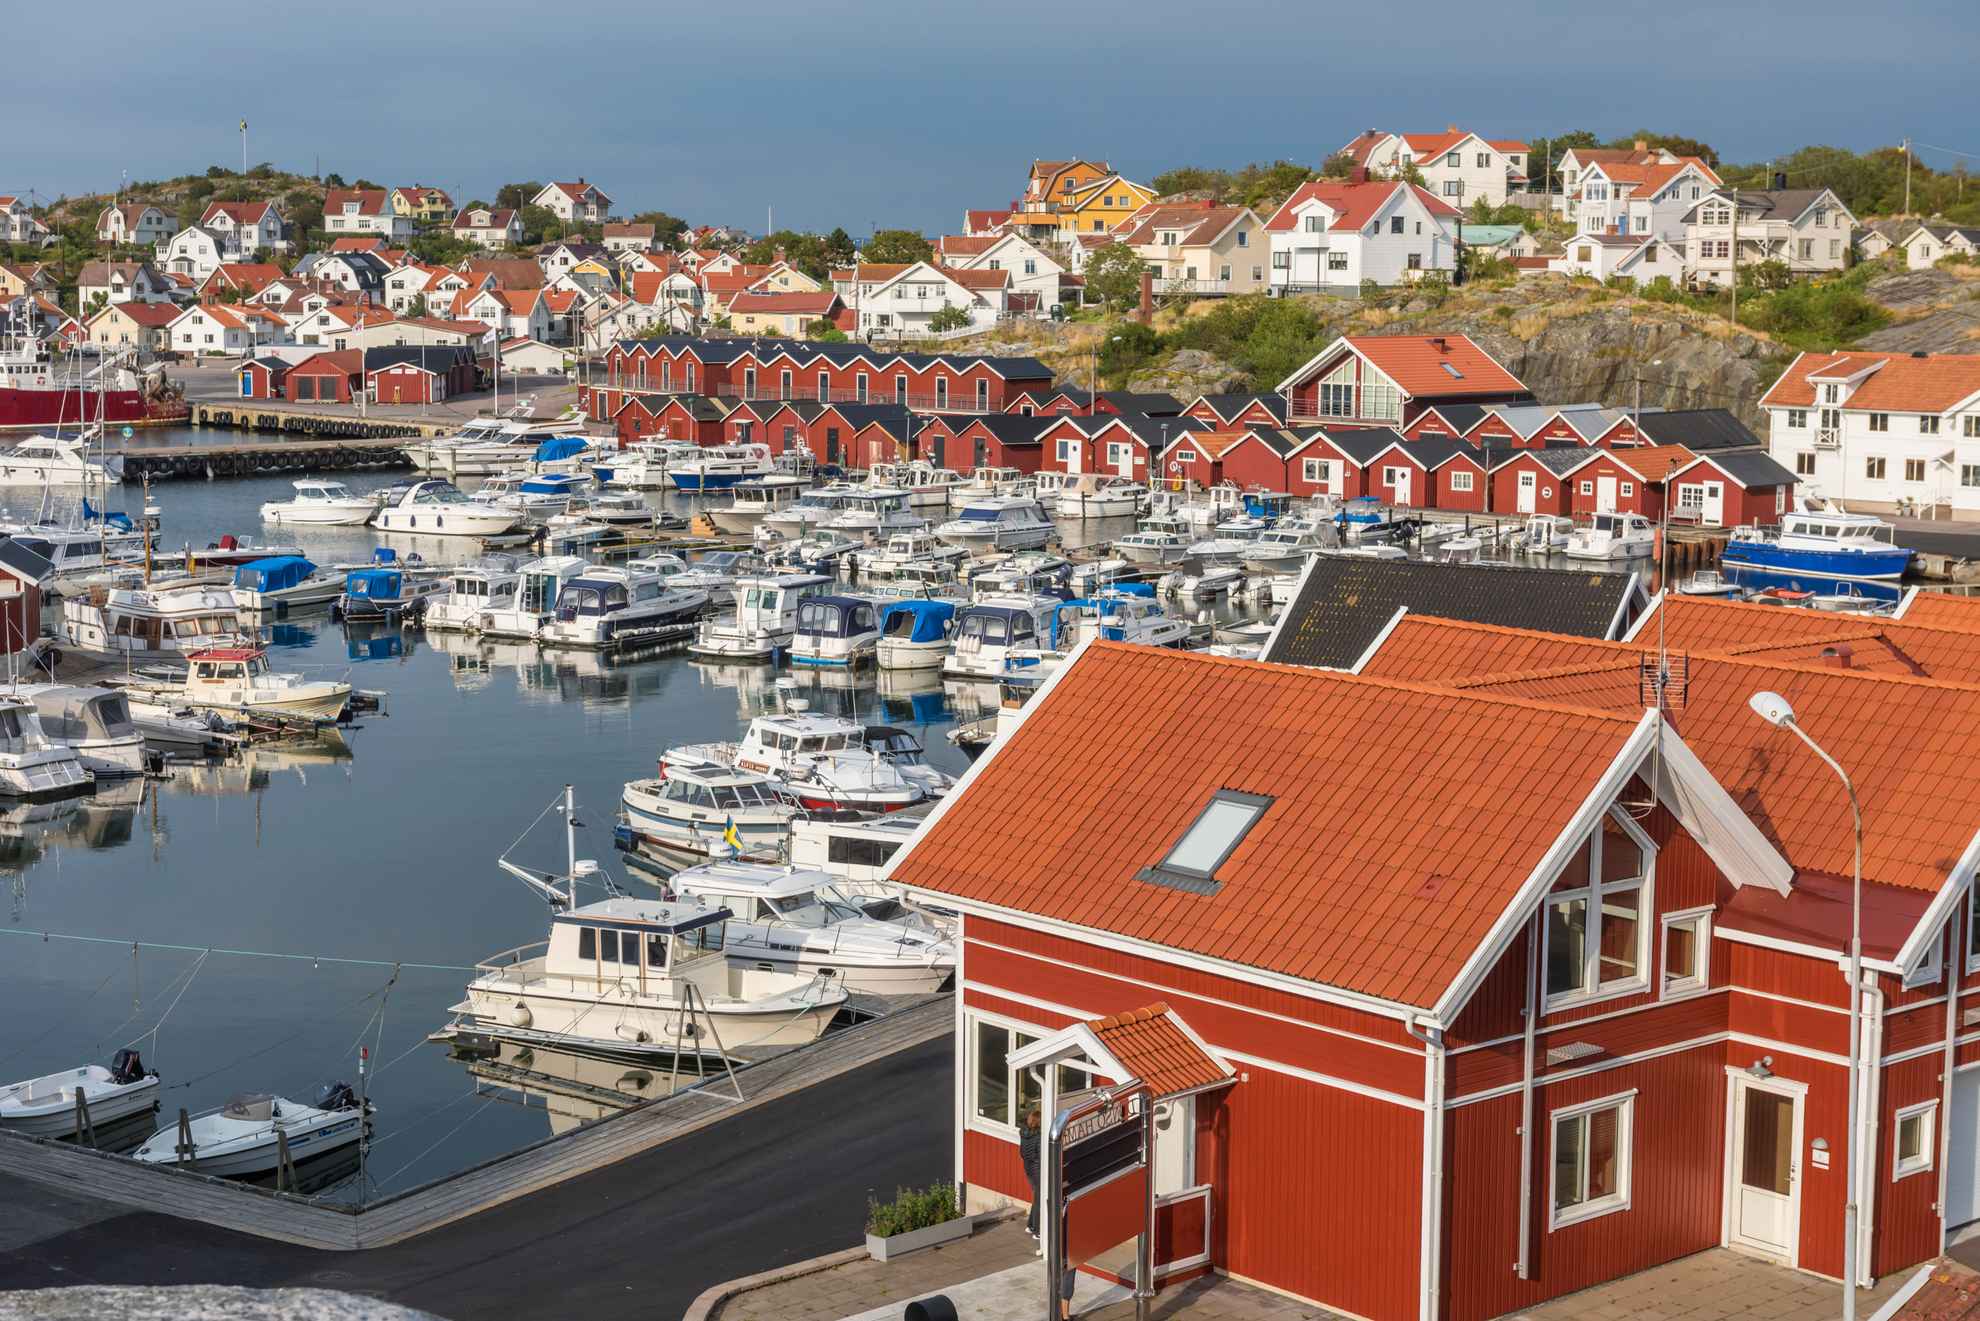 A harbor with boats, red fishing huts and white houses.